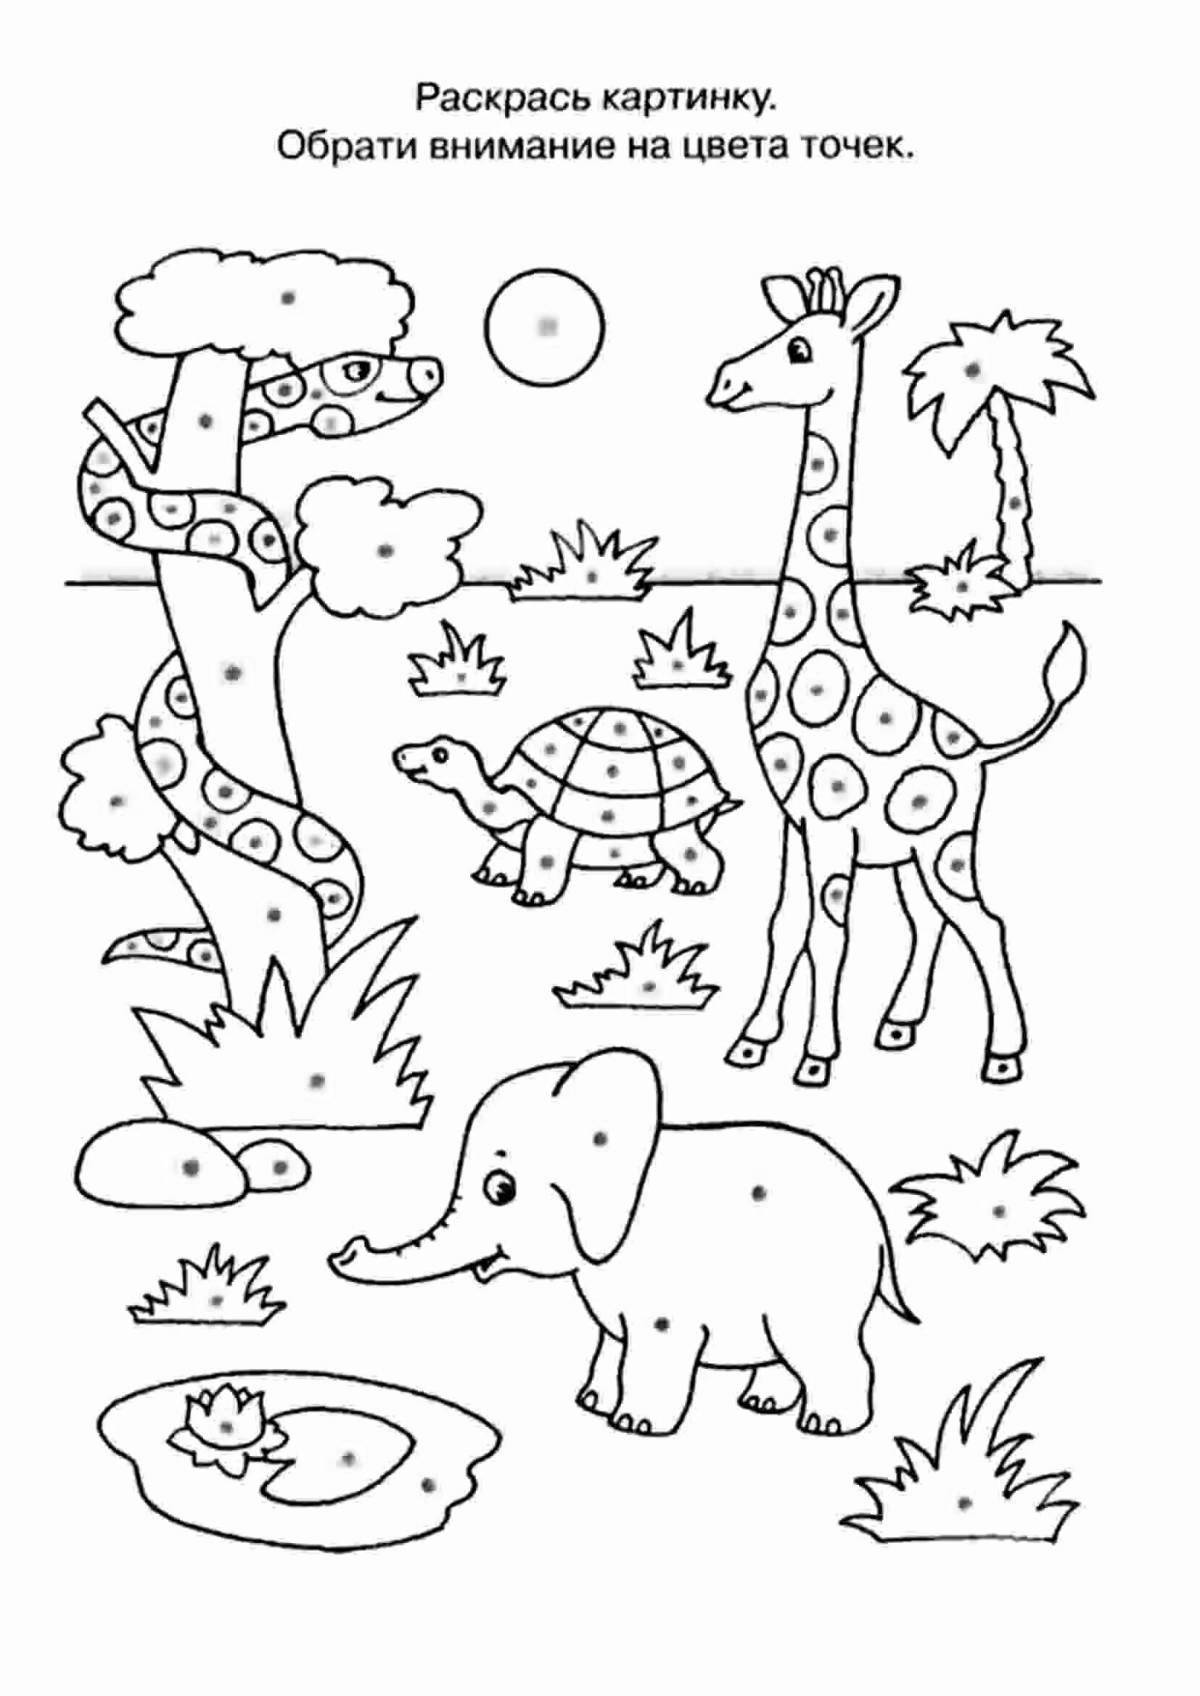 Creative coloring book to develop attention